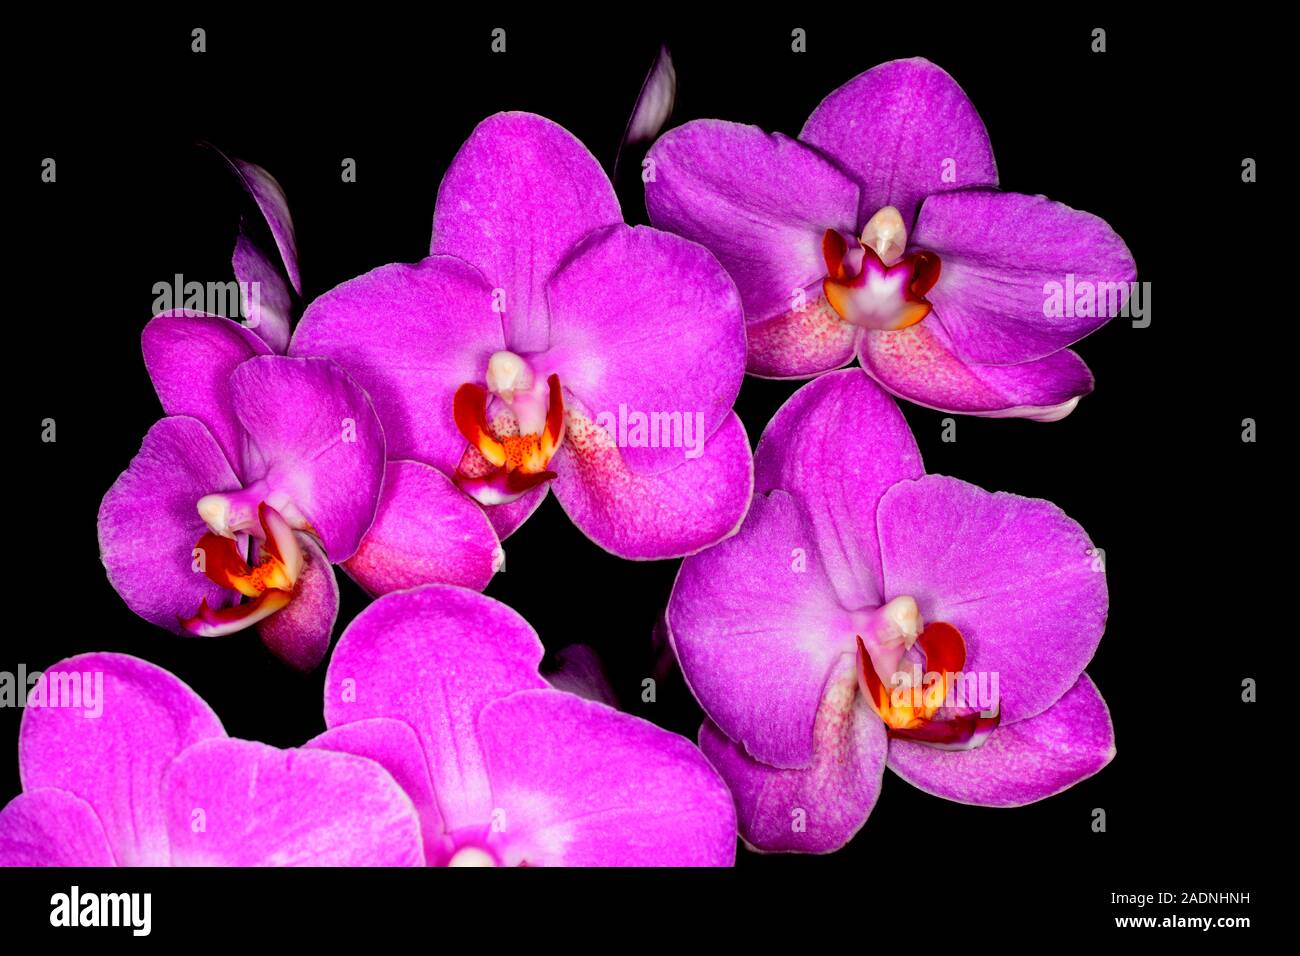 Orchid. or Orchidaceous. Closeup of four crimson flowers with a black background. Stock Photo